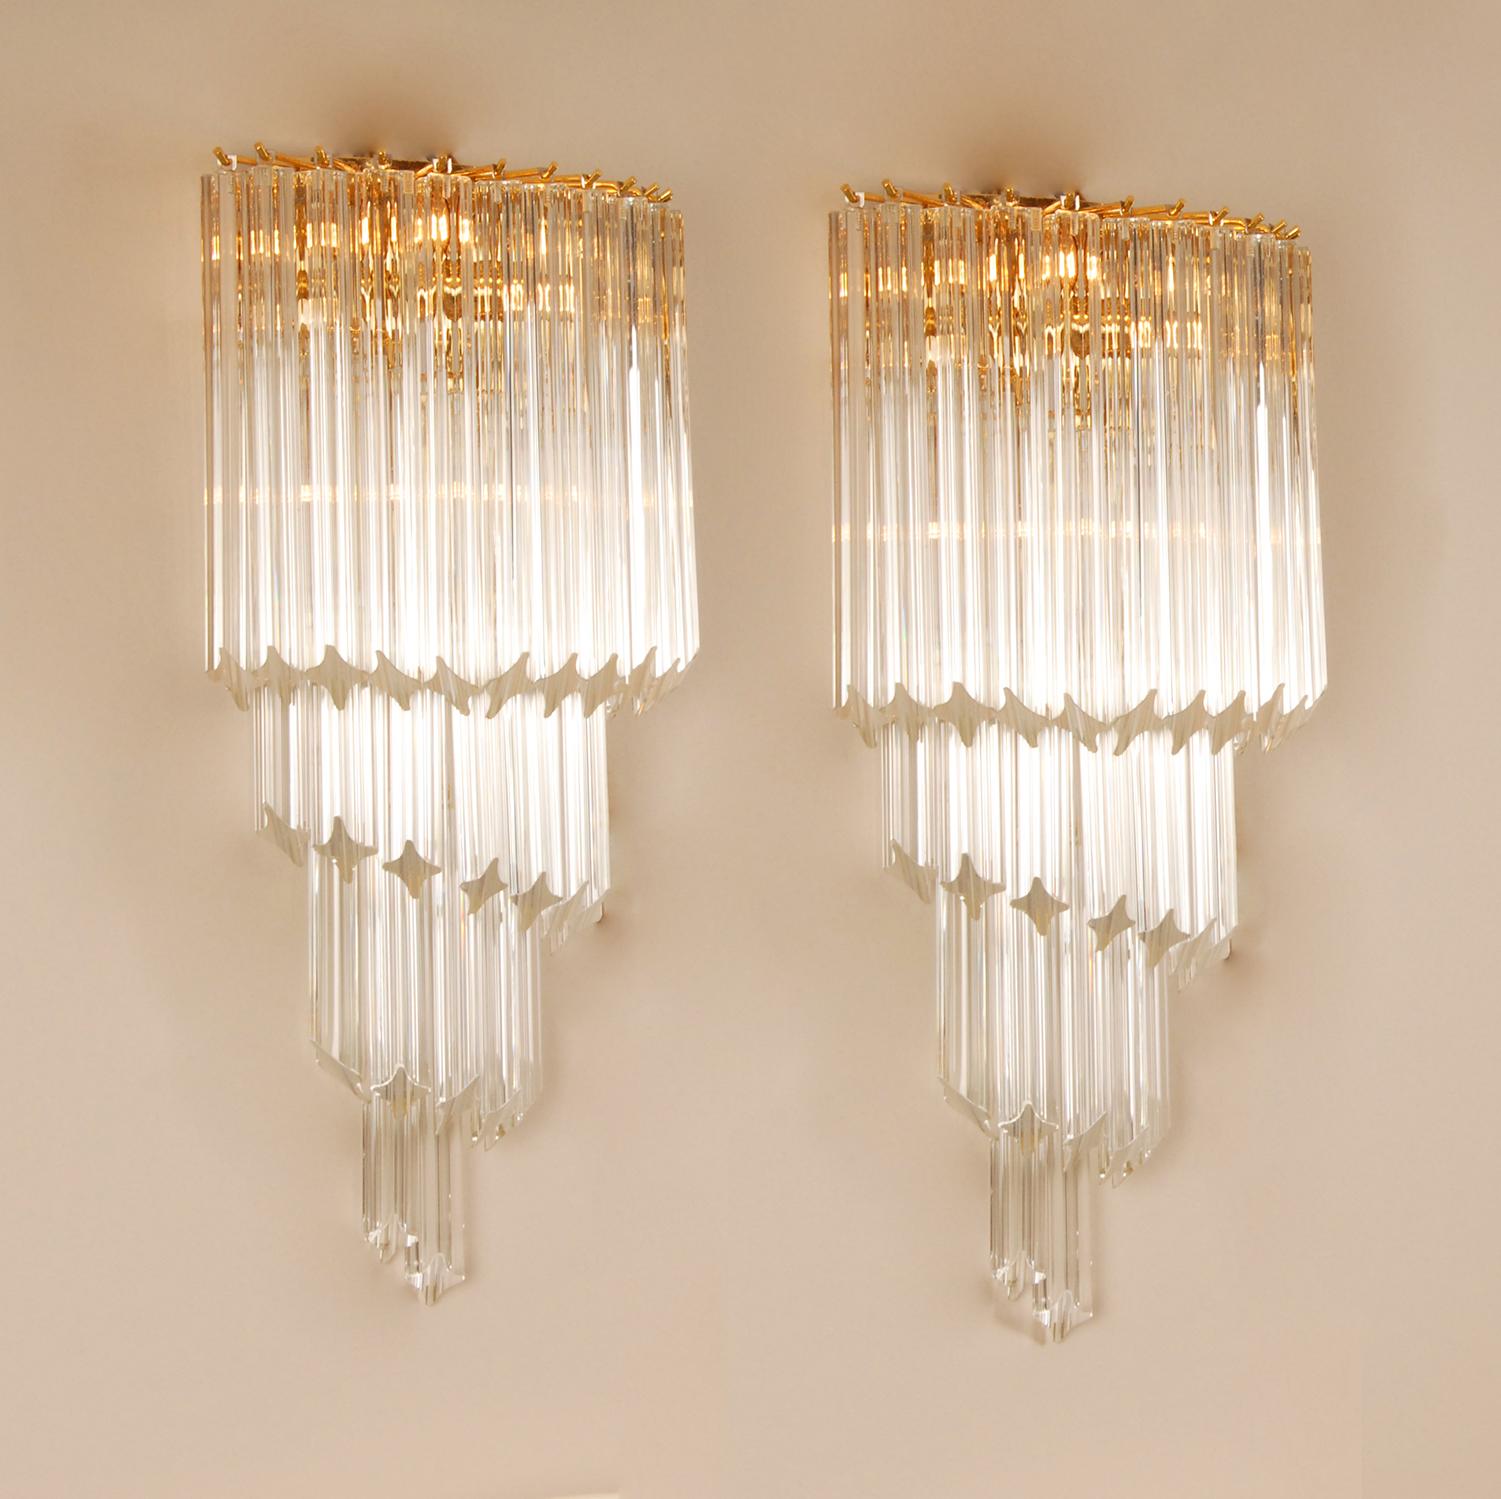 Hand-Crafted Vintage Venini Spiral Wall Sconces 1960s Italian Murano Glass Wall Lamps  a pair